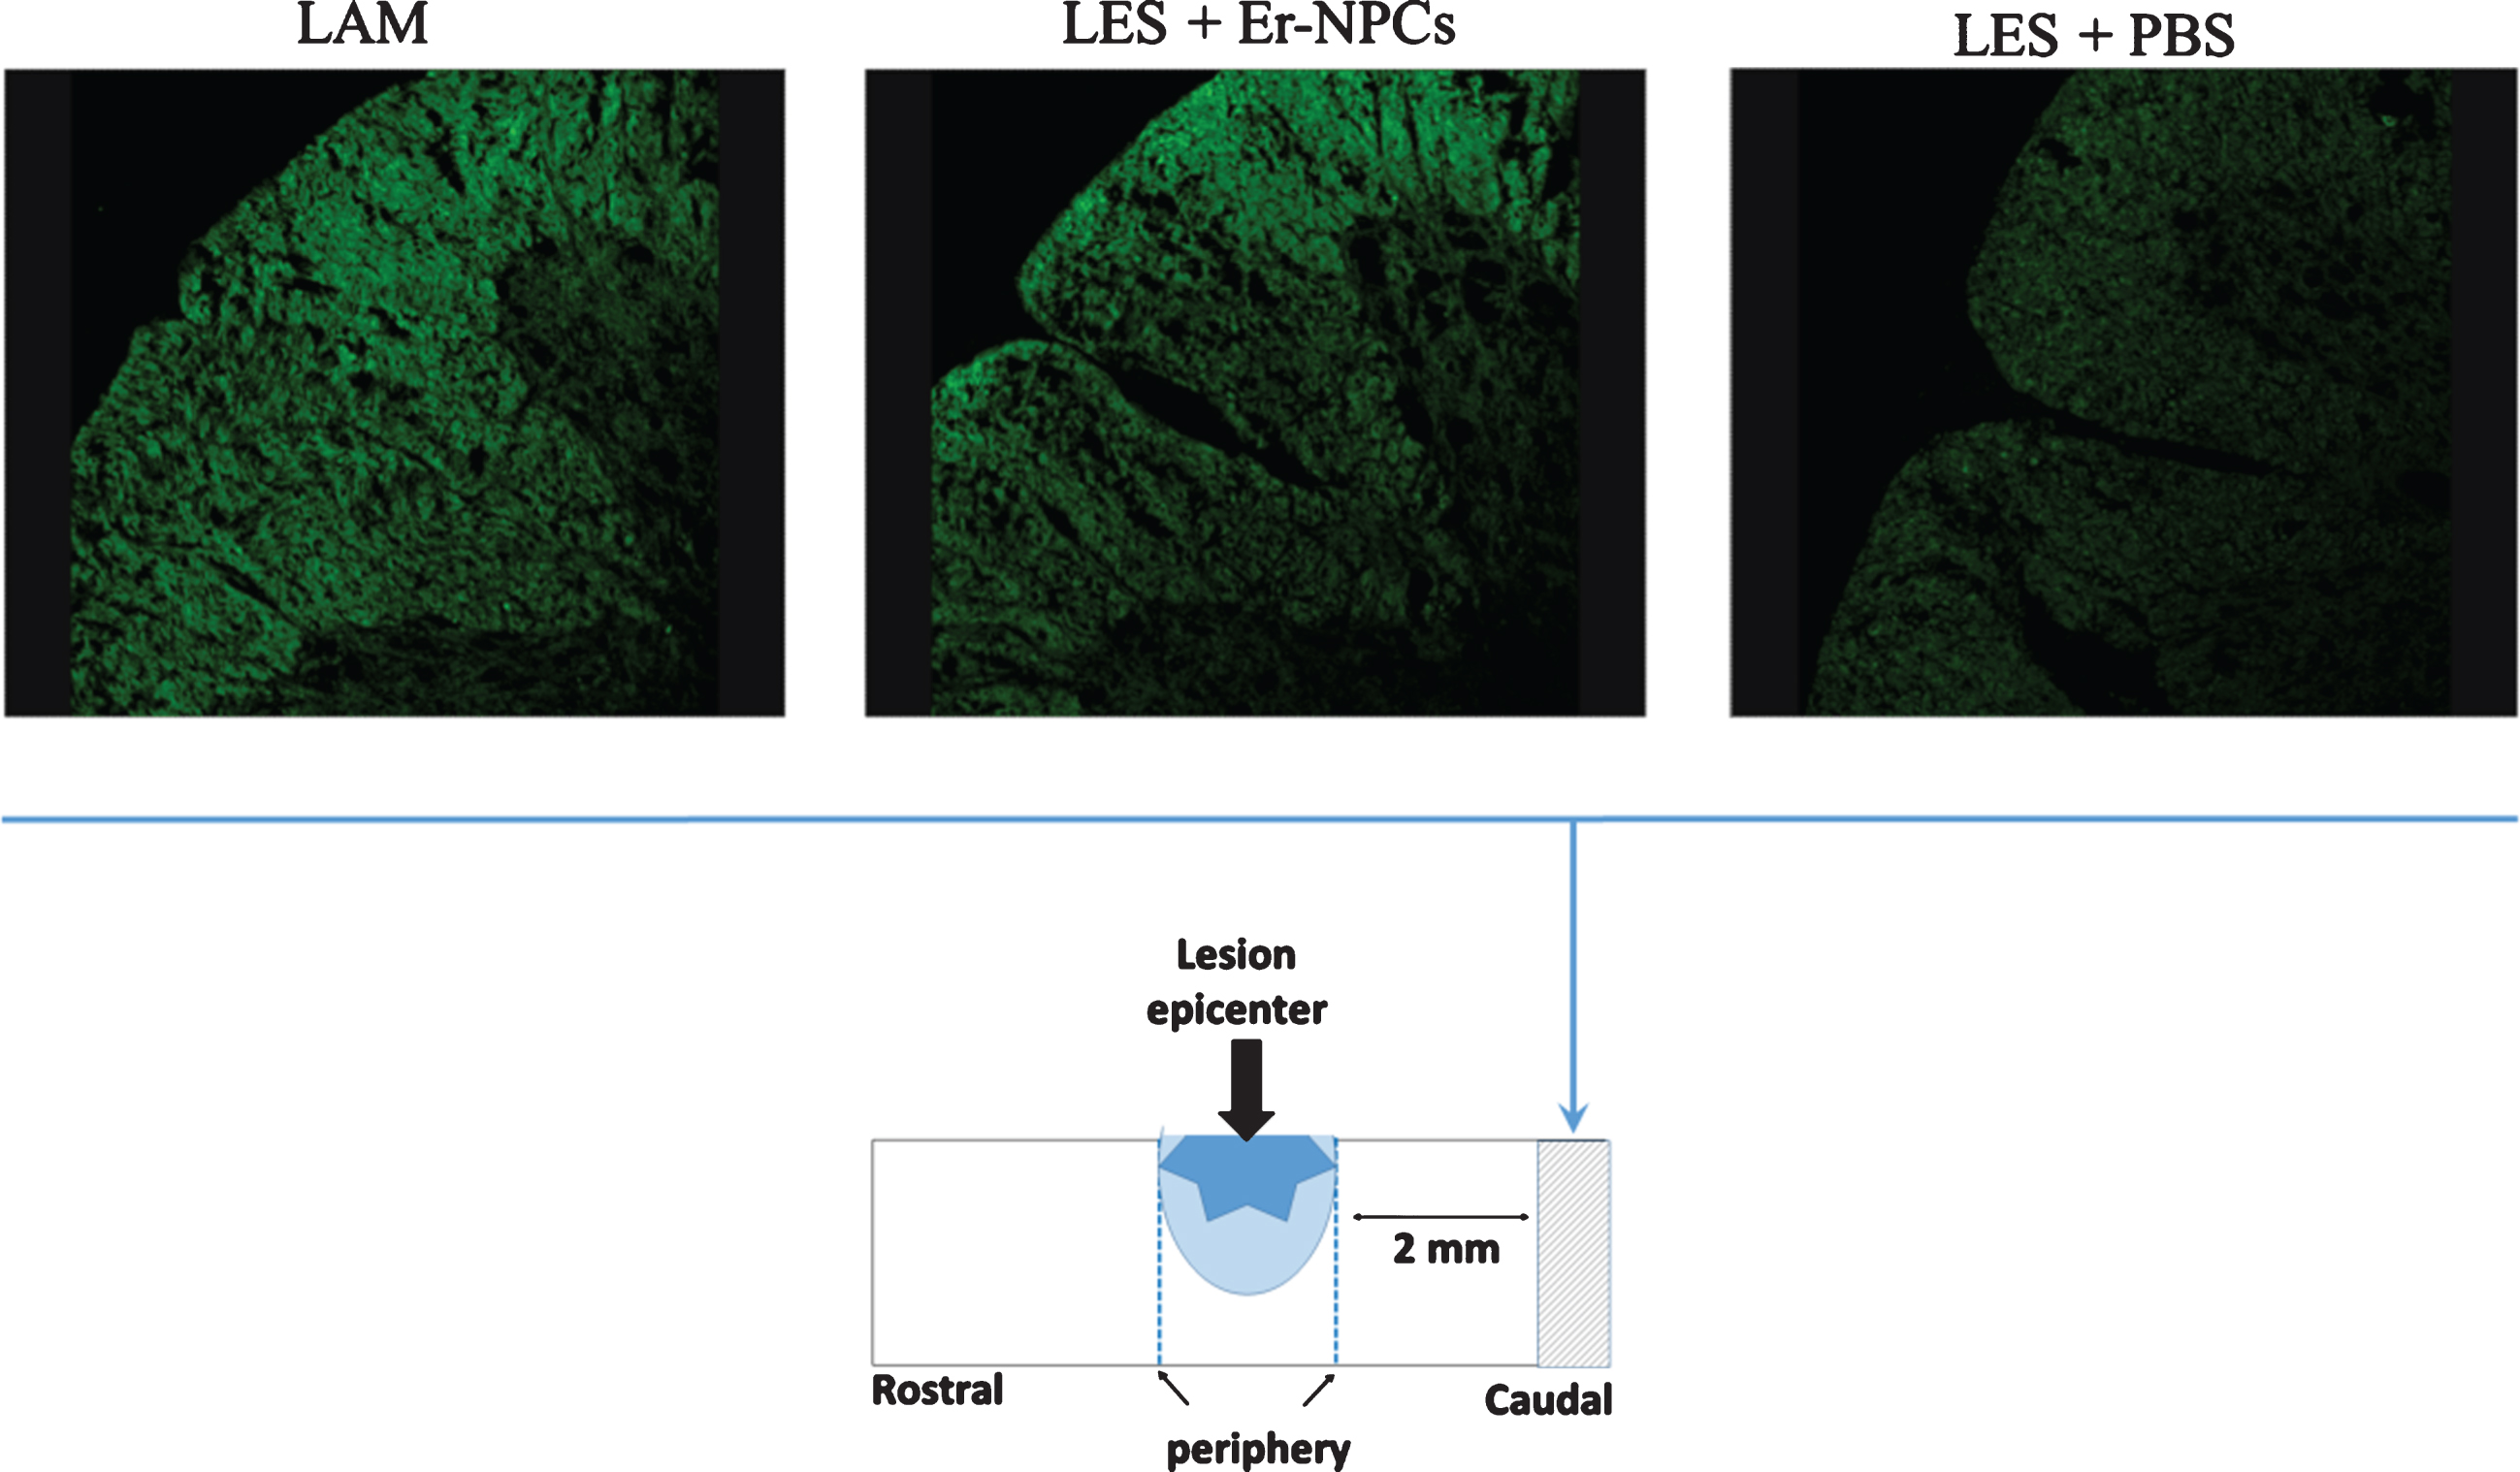 Myelin preservation in the injured cord of animals treated with Er-NPCs. Myelin preservation was evaluated by means of Fluoromyelin™ staining (green) performed in sections at the lesion epicenter, and 2 mm caudally to the lesion site (please see schematic representation).